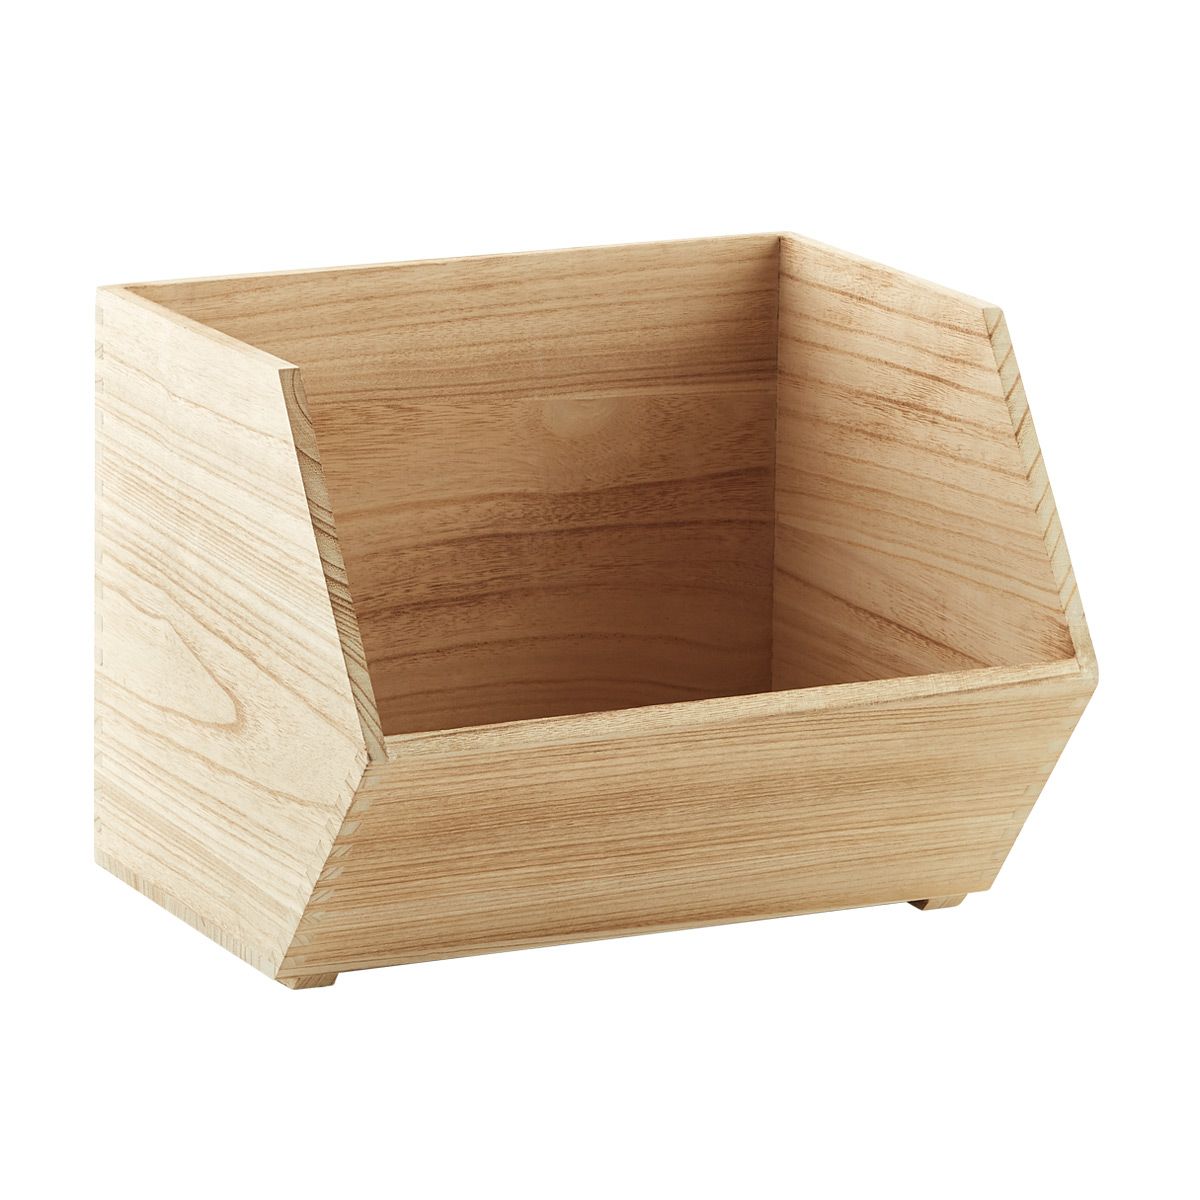 Wooden Stacking Bin | The Container Store